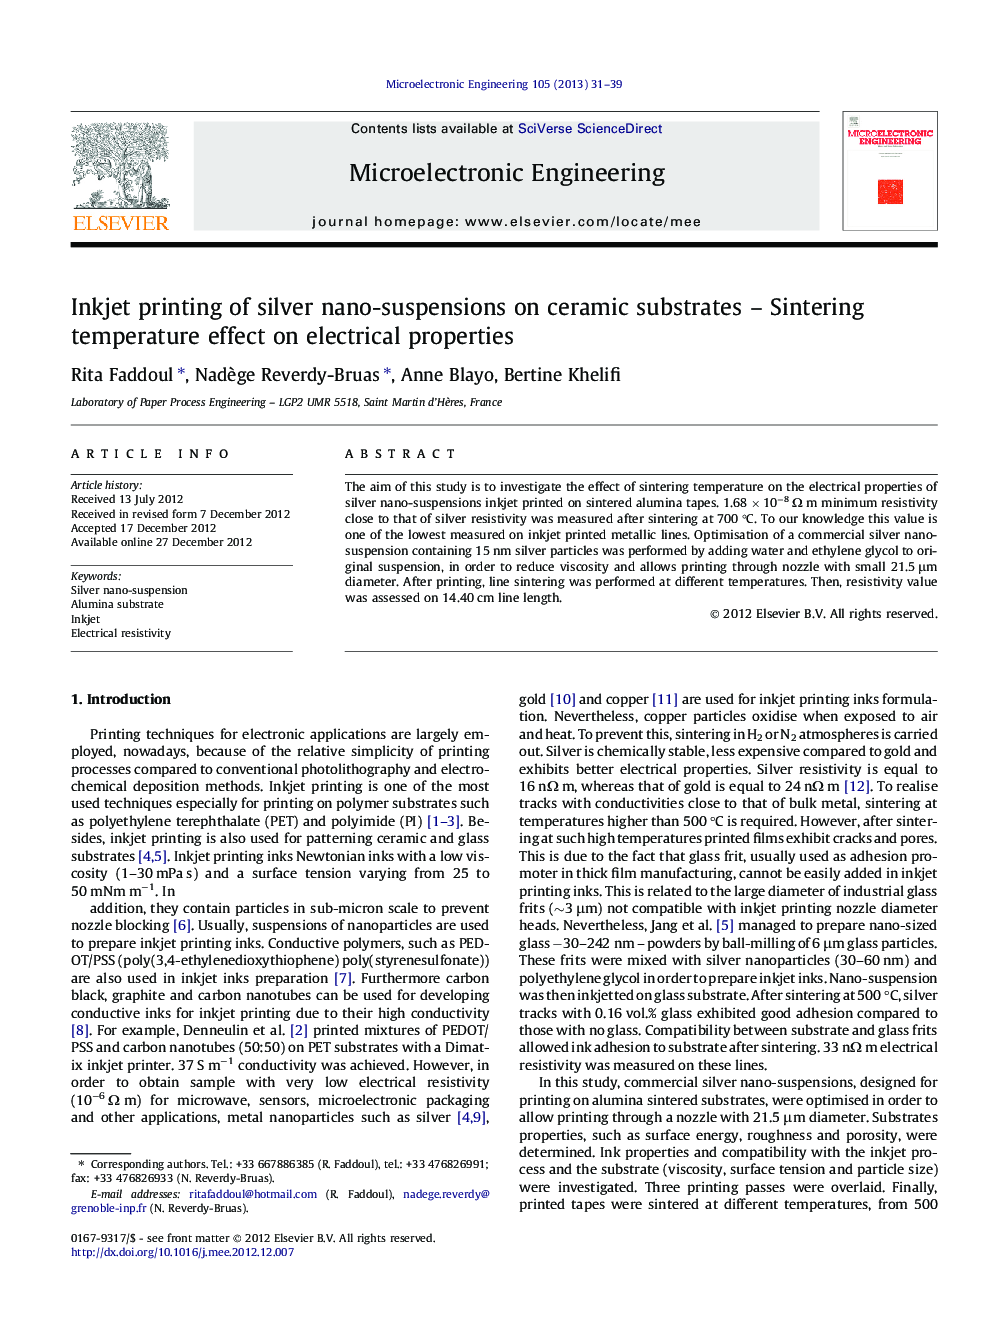 Inkjet printing of silver nano-suspensions on ceramic substrates – Sintering temperature effect on electrical properties